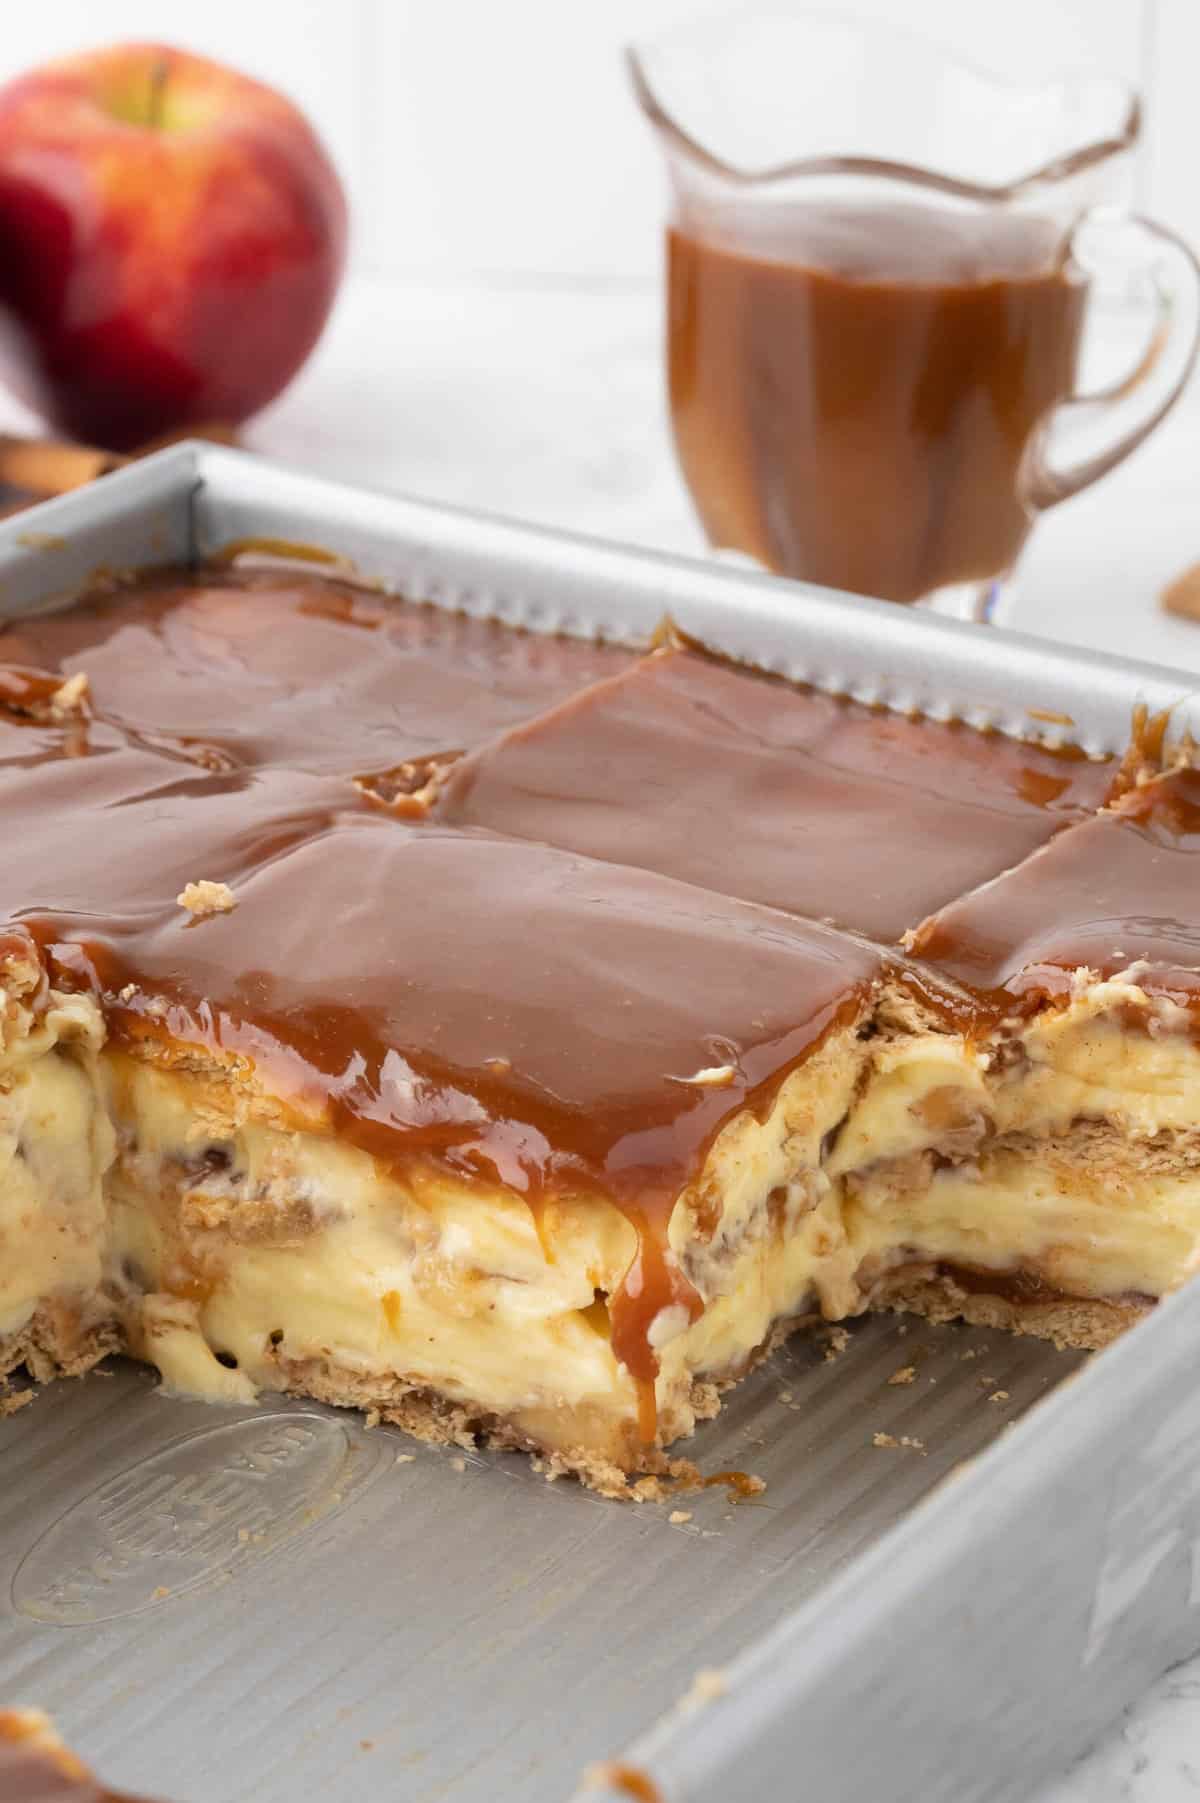 Slices of caramel apple eclair cake in a baking dish in front of a glass jar of caramel sauce and an apple.